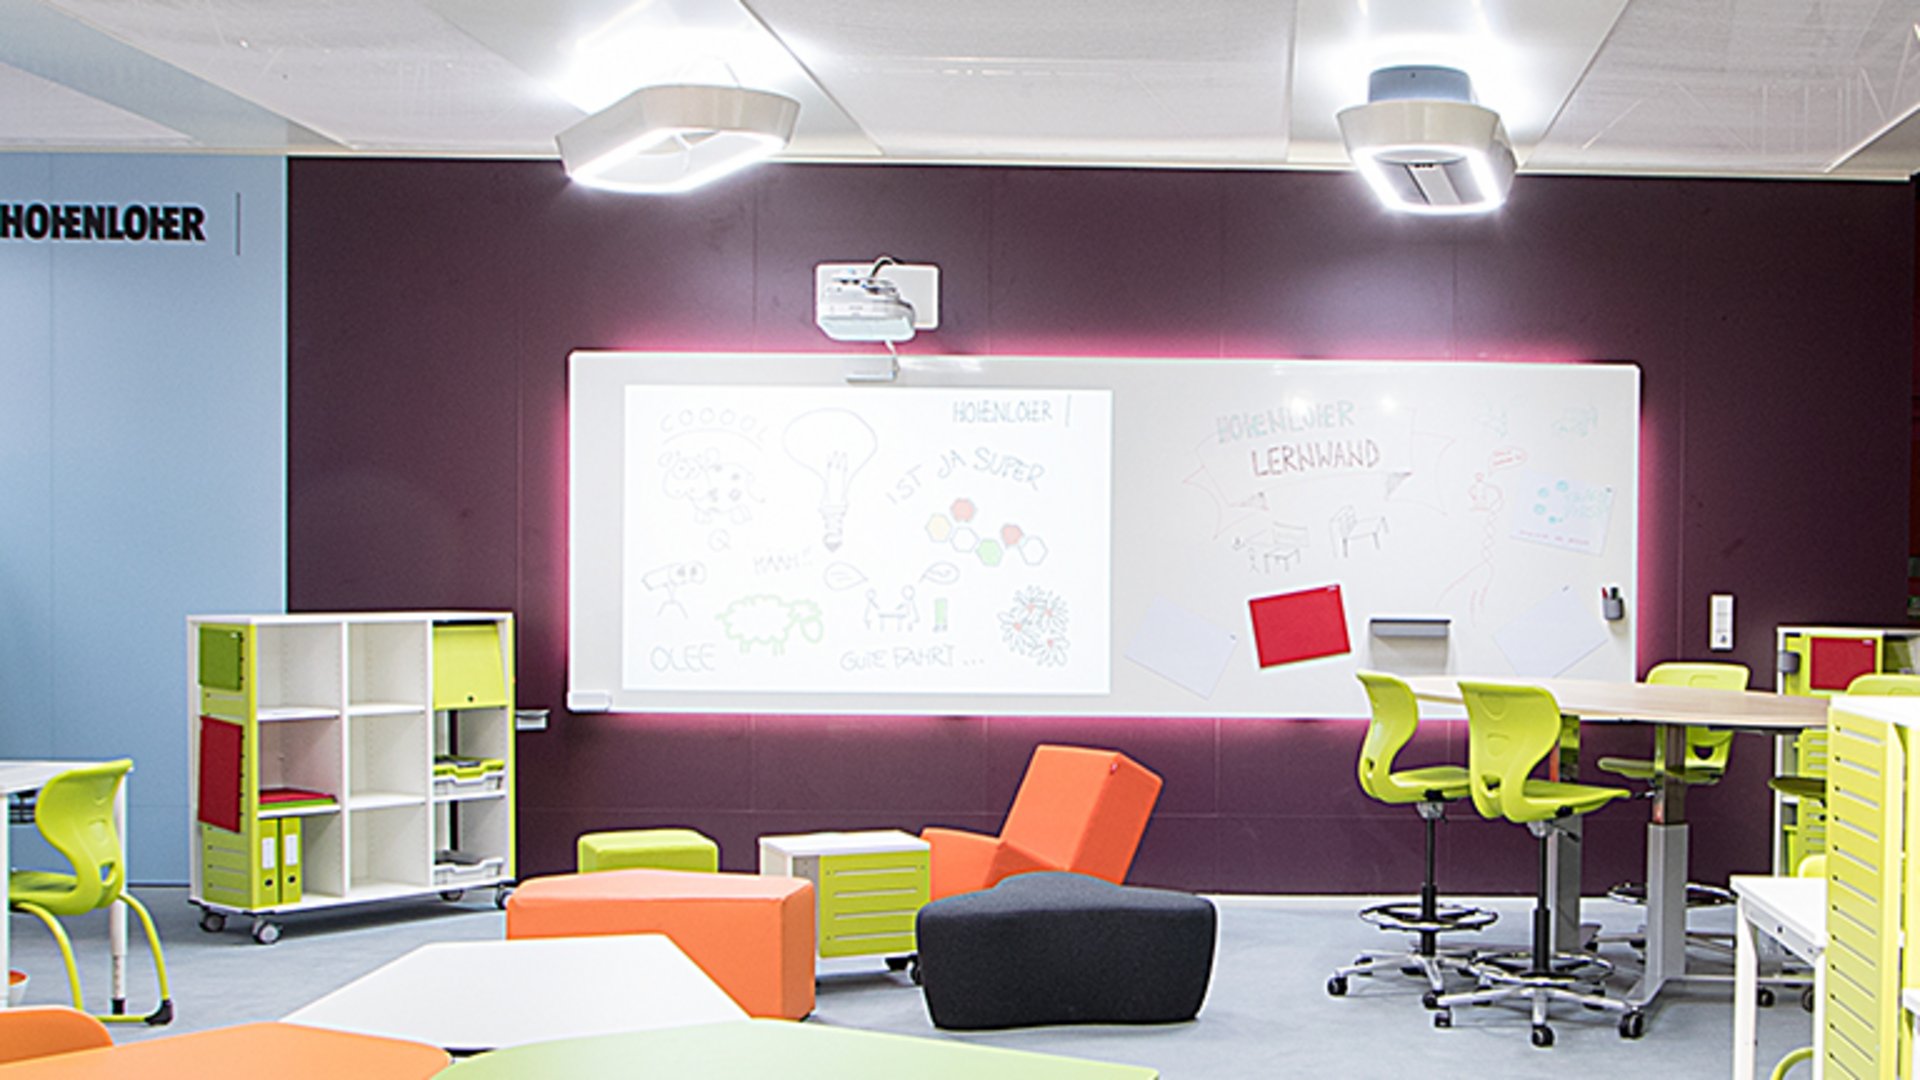 Image: Learning wall in a room